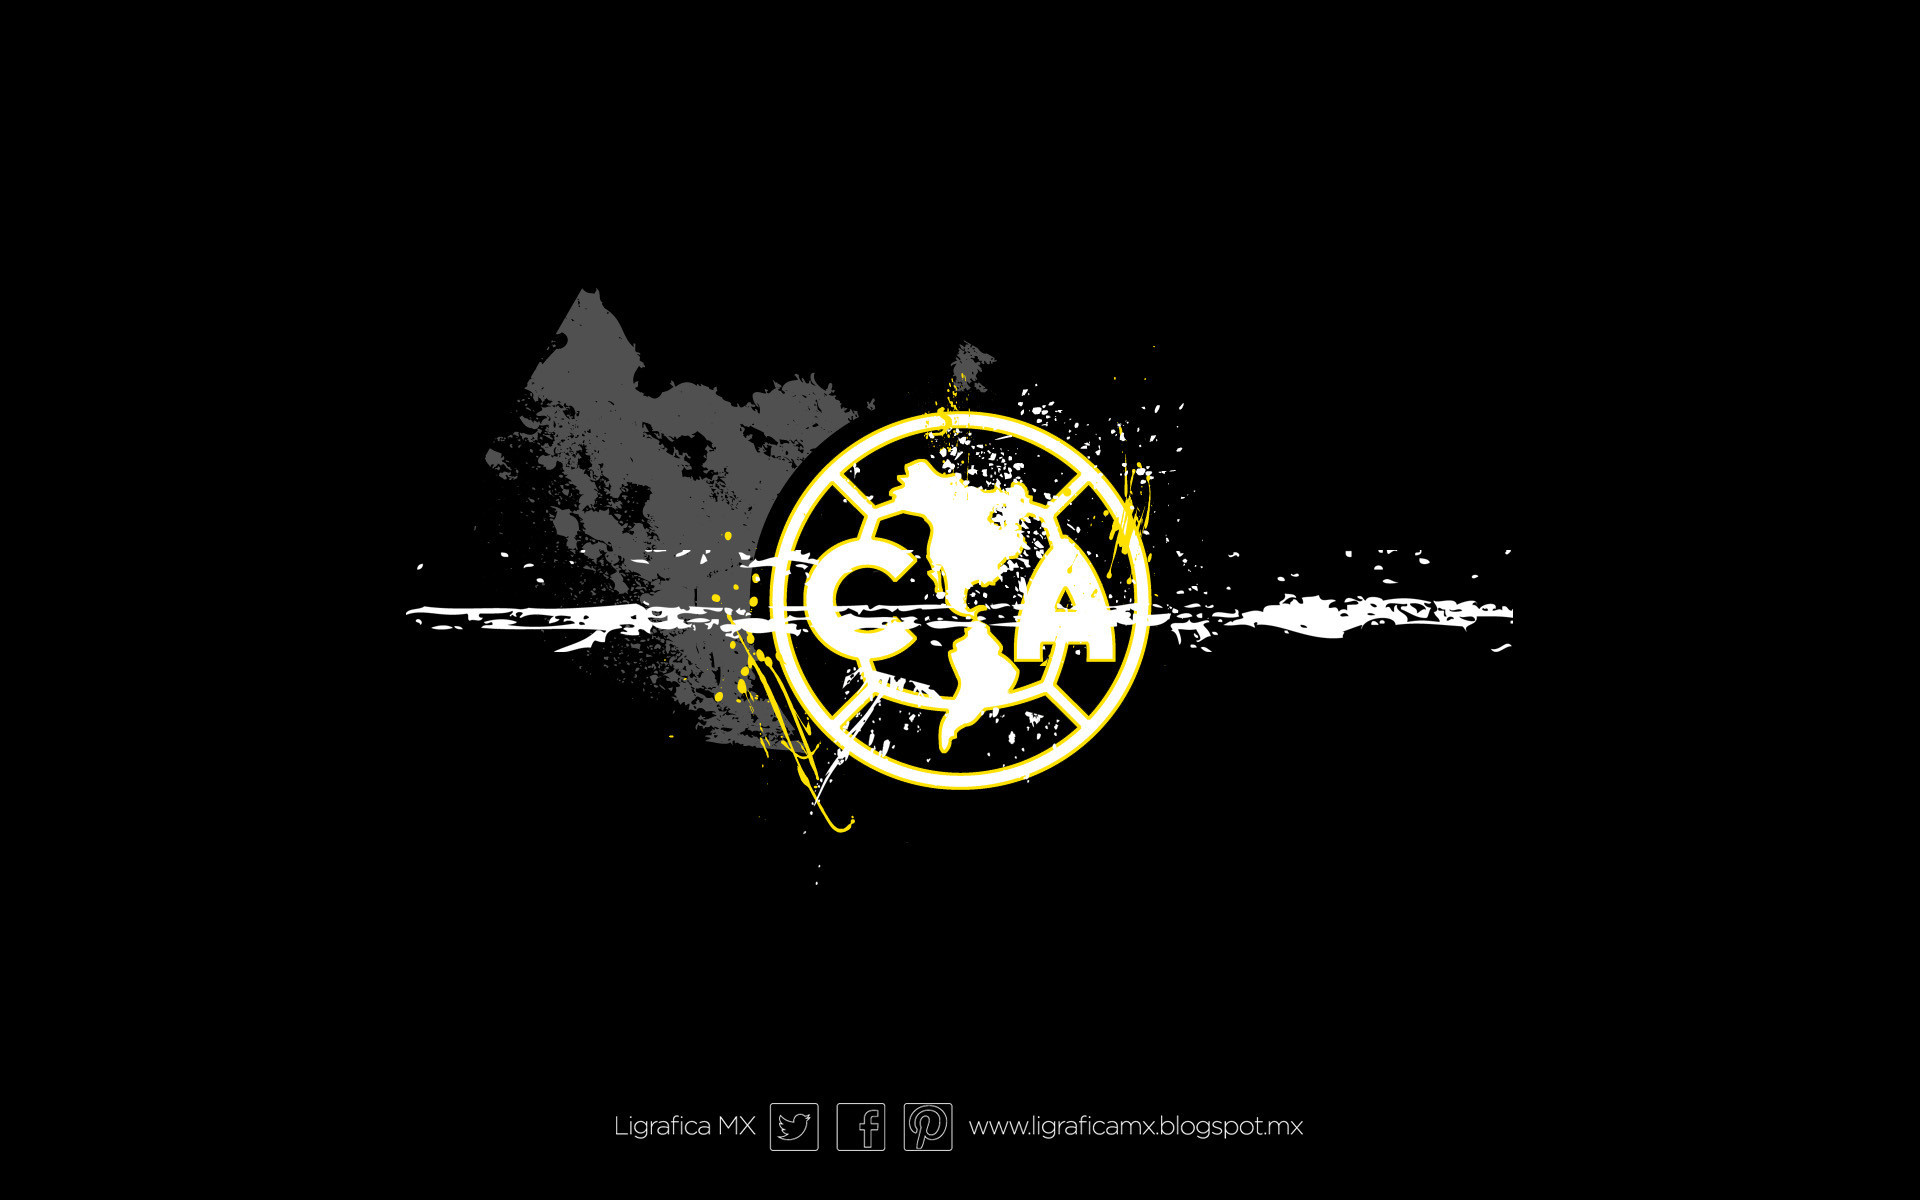 Club Aguilas Del America Wallpapers (62+ images)